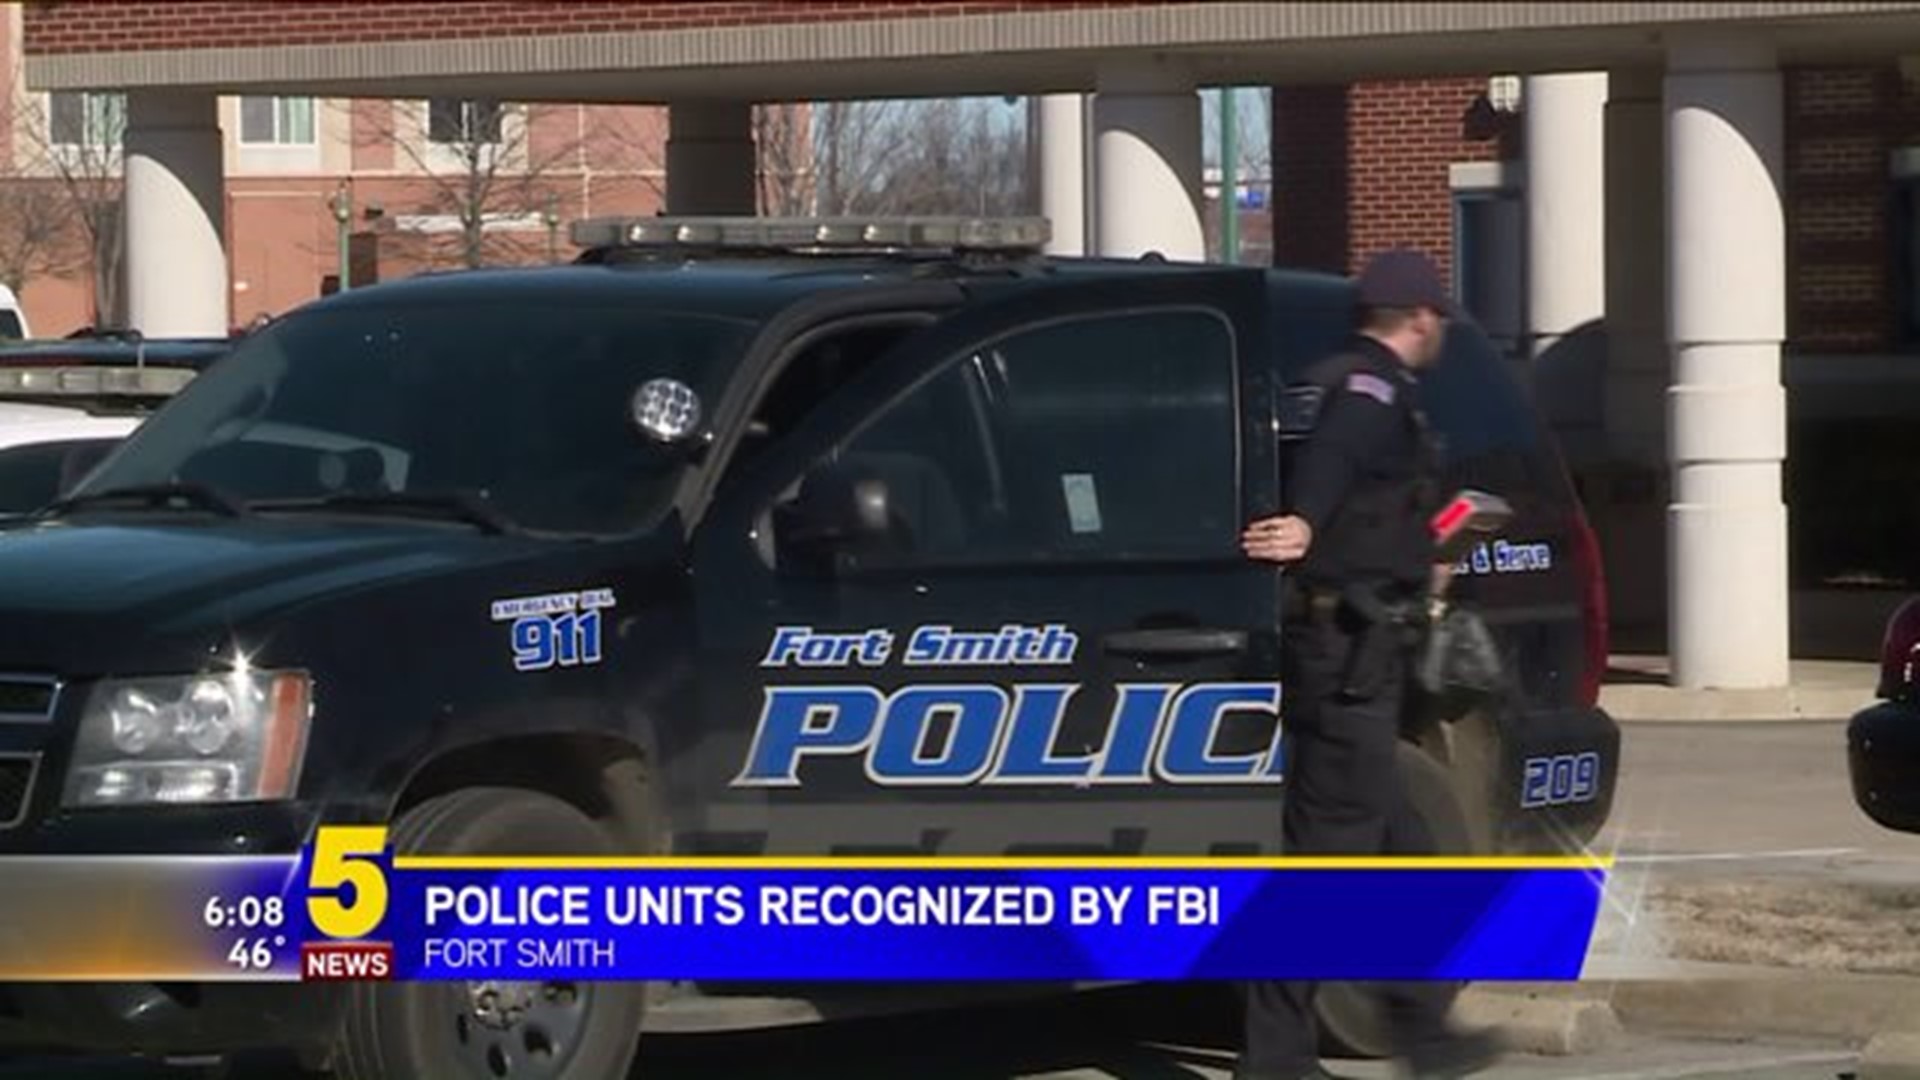 Police Units Recognized By FBI